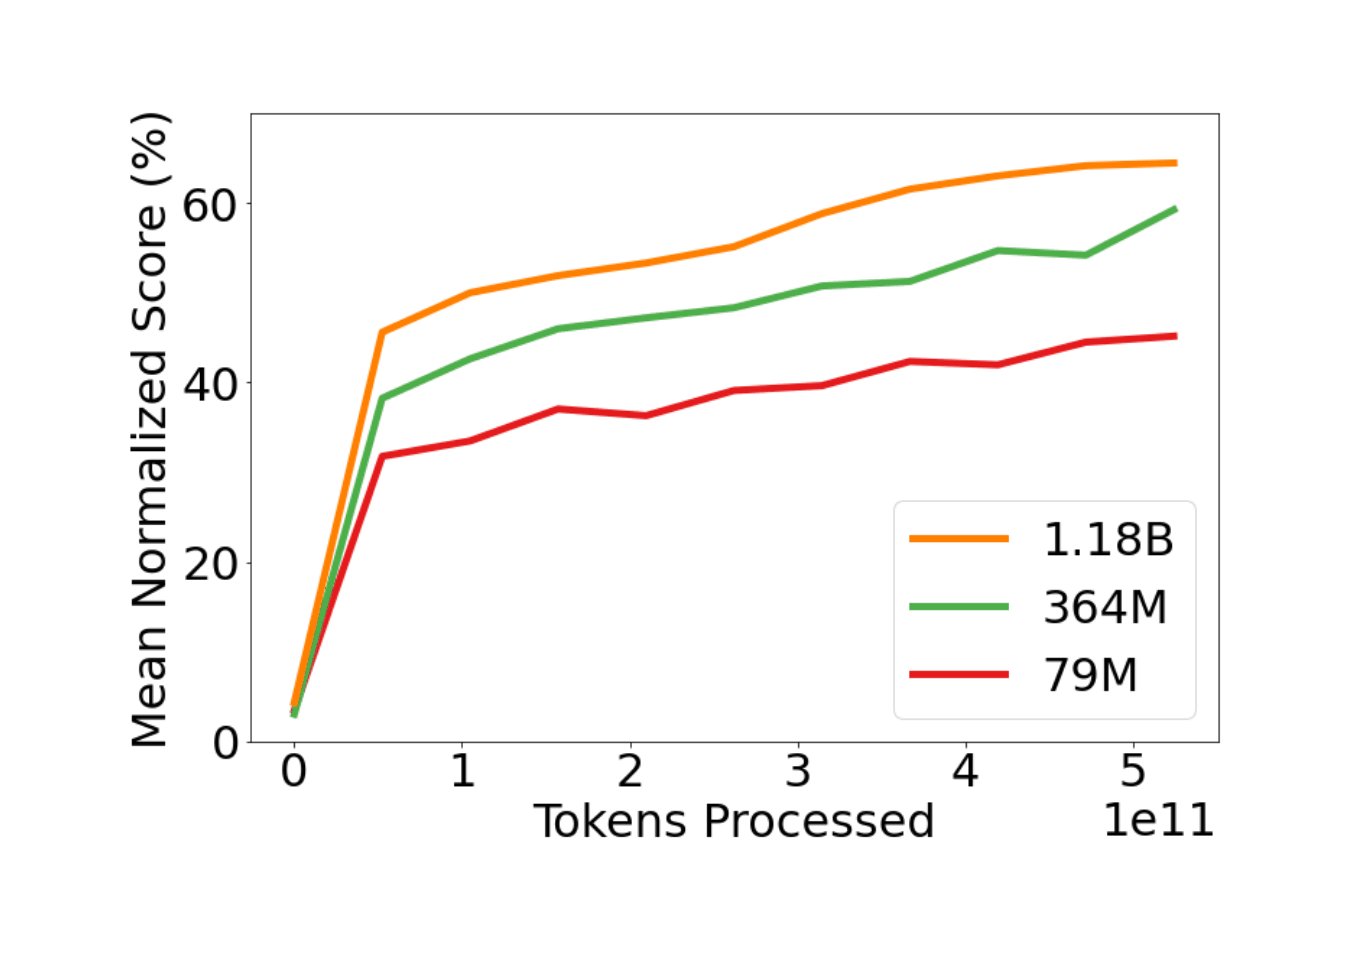 Figure 8: Model size scaling laws results. In-distribution performance as a function of tokens processed for 3 model scales. Performance is first mean-aggregated within each separate control domain, and then mean-aggregated across all domains. We can see a consistent improvement as model capacity is increased for a fixed number of tokens.